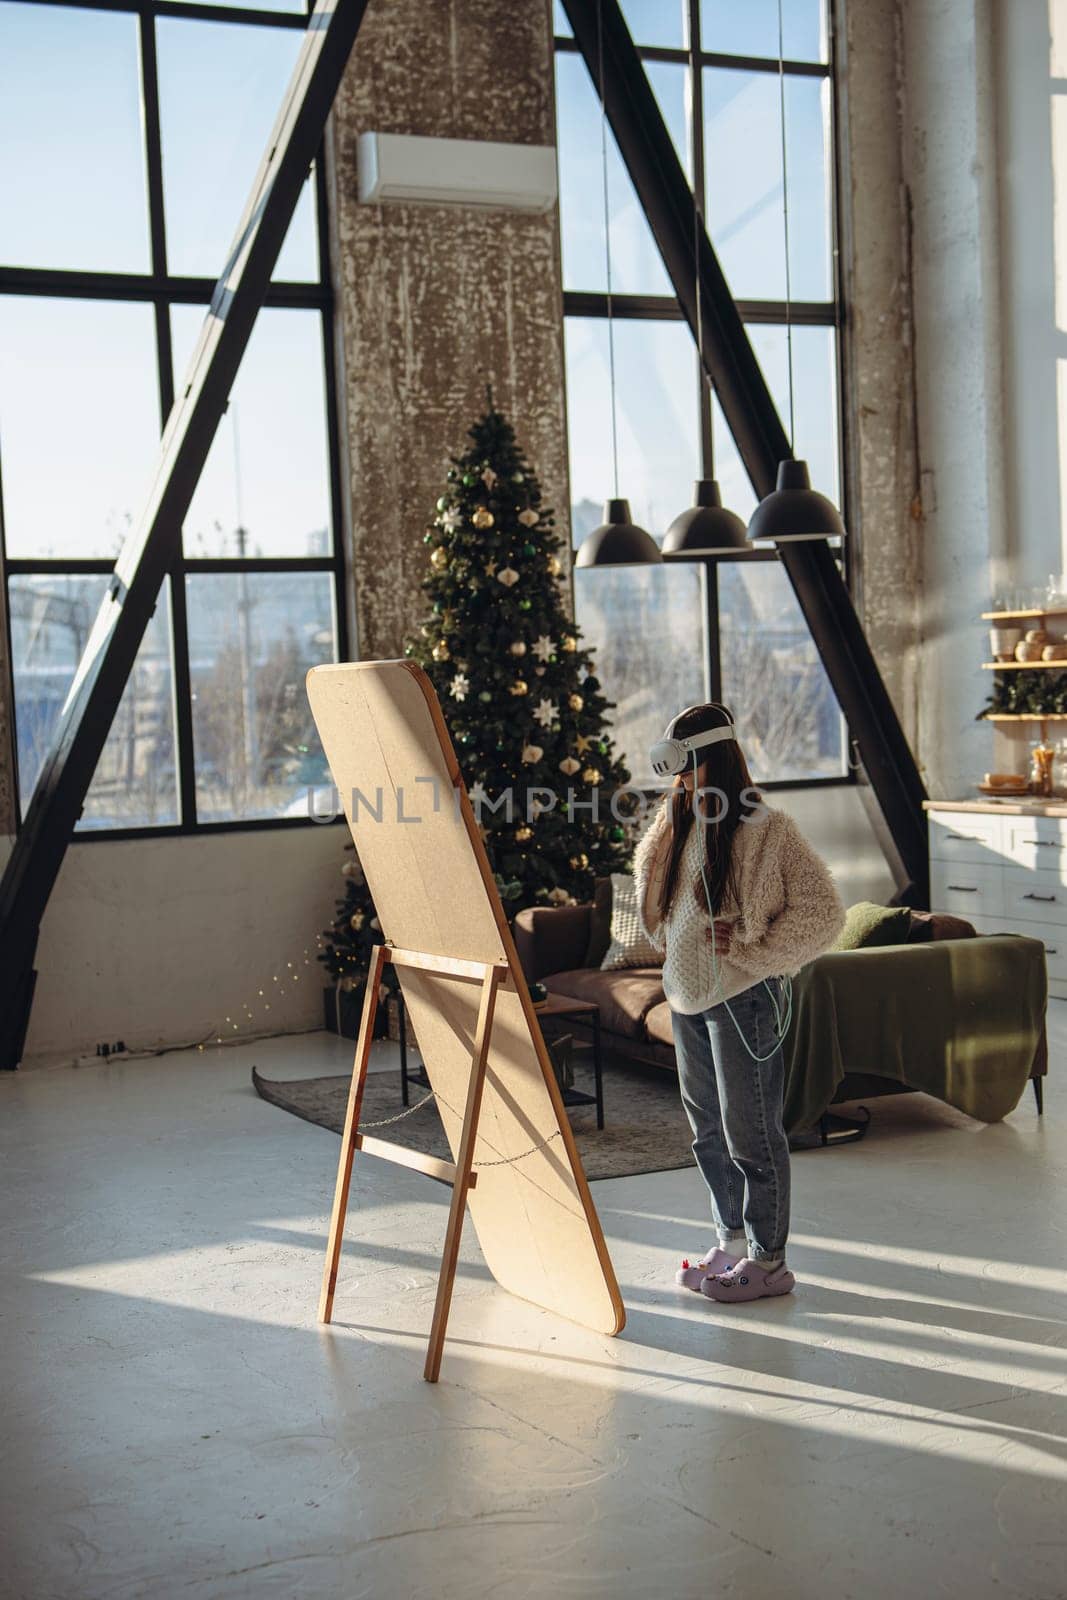 Embraced by the Christmas atmosphere, a young woman in light attire and a VR headset stands before the mirror. High quality photo